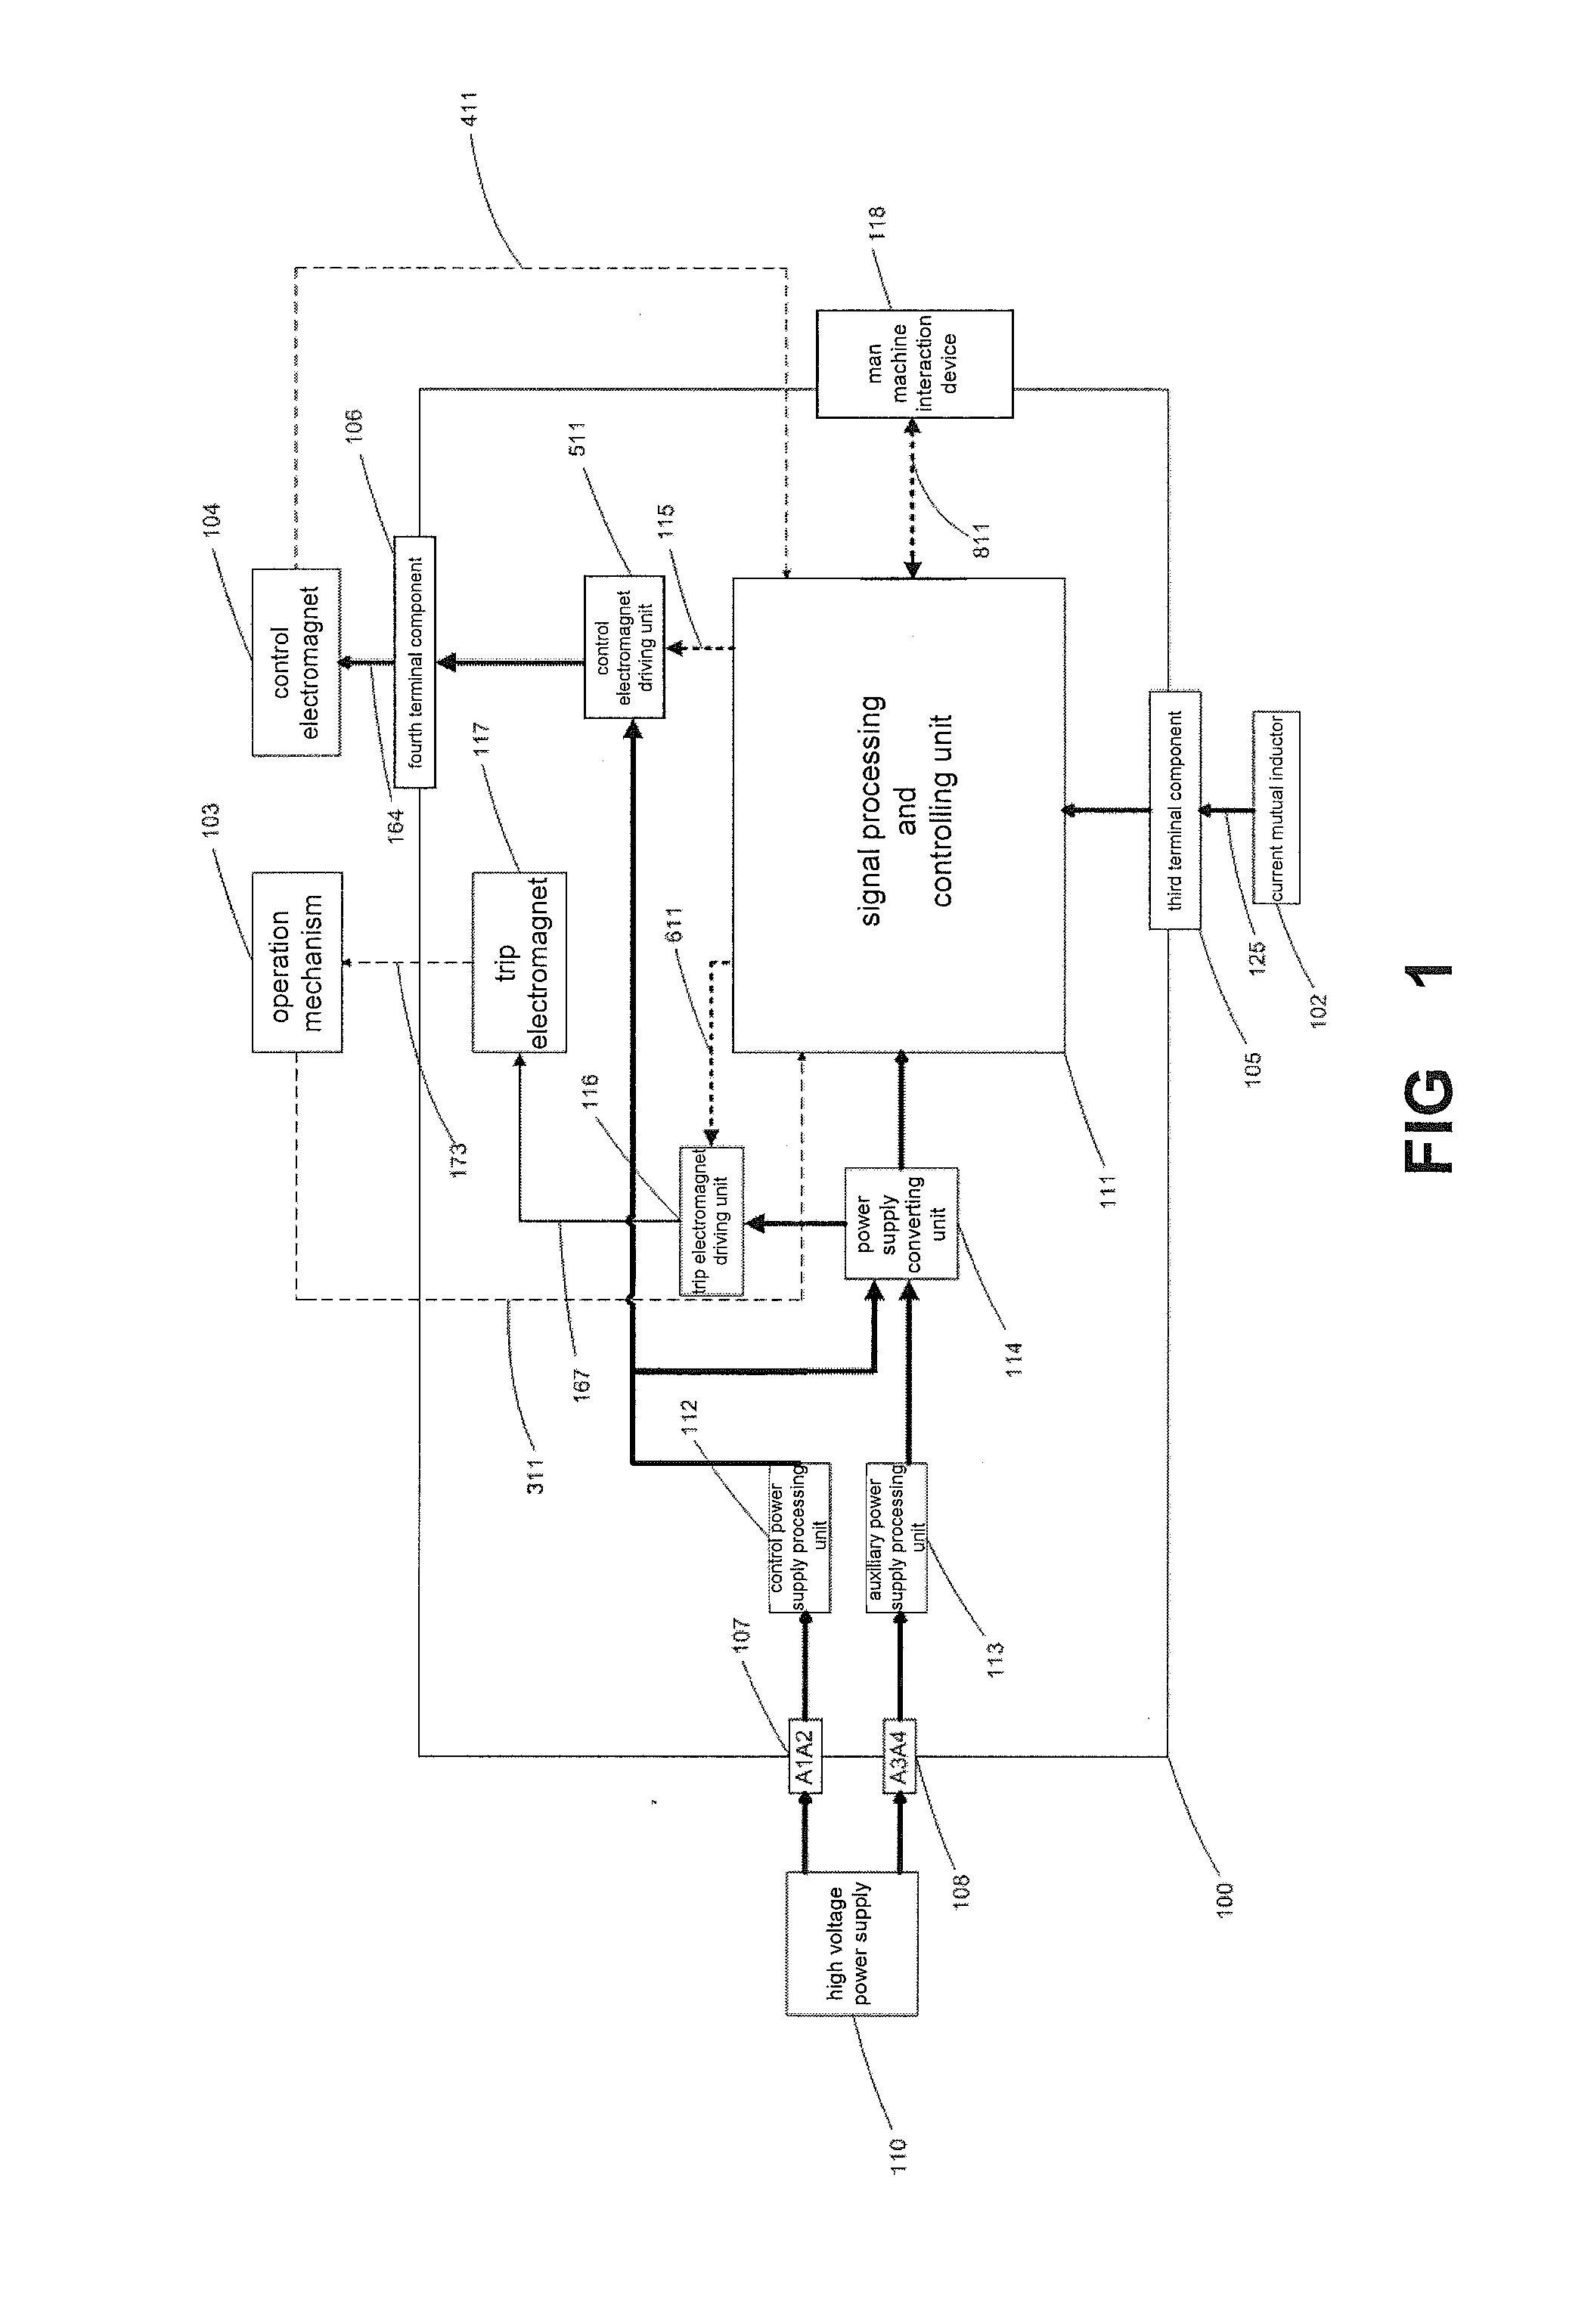 Protection module for control and protective switching device